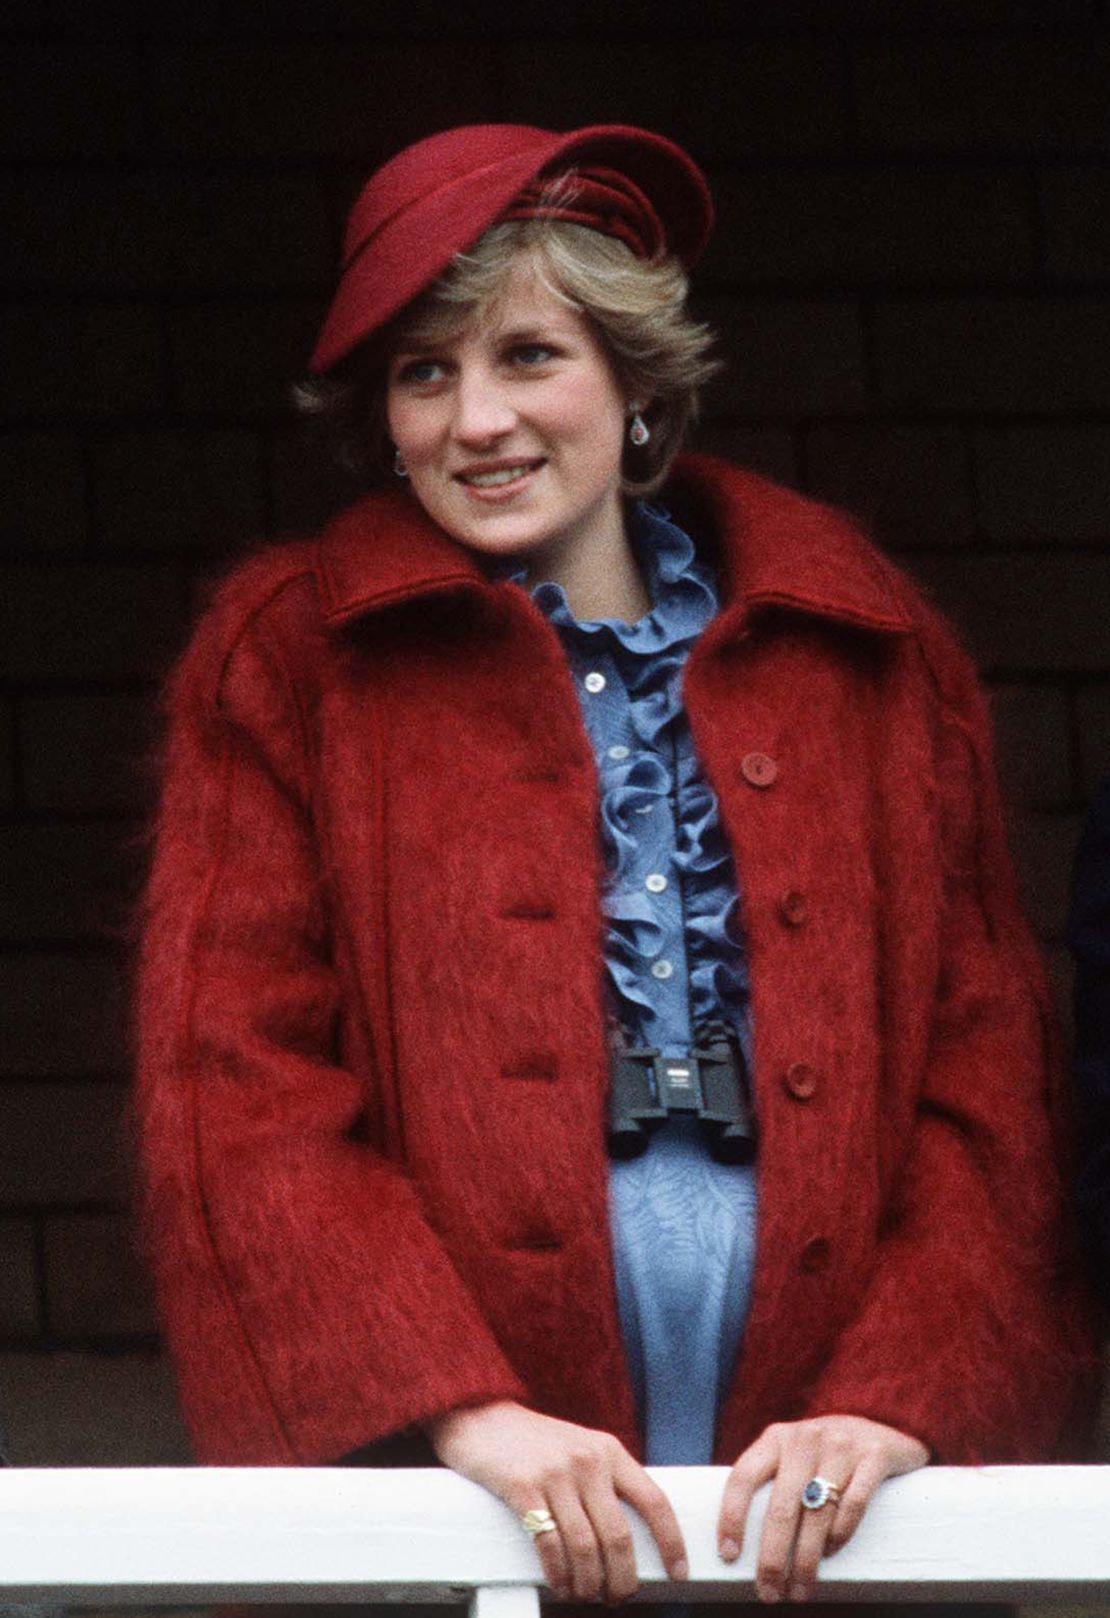 The late Diana Princess of Wales photographed in 1984 while pregnant with Prince Harry.